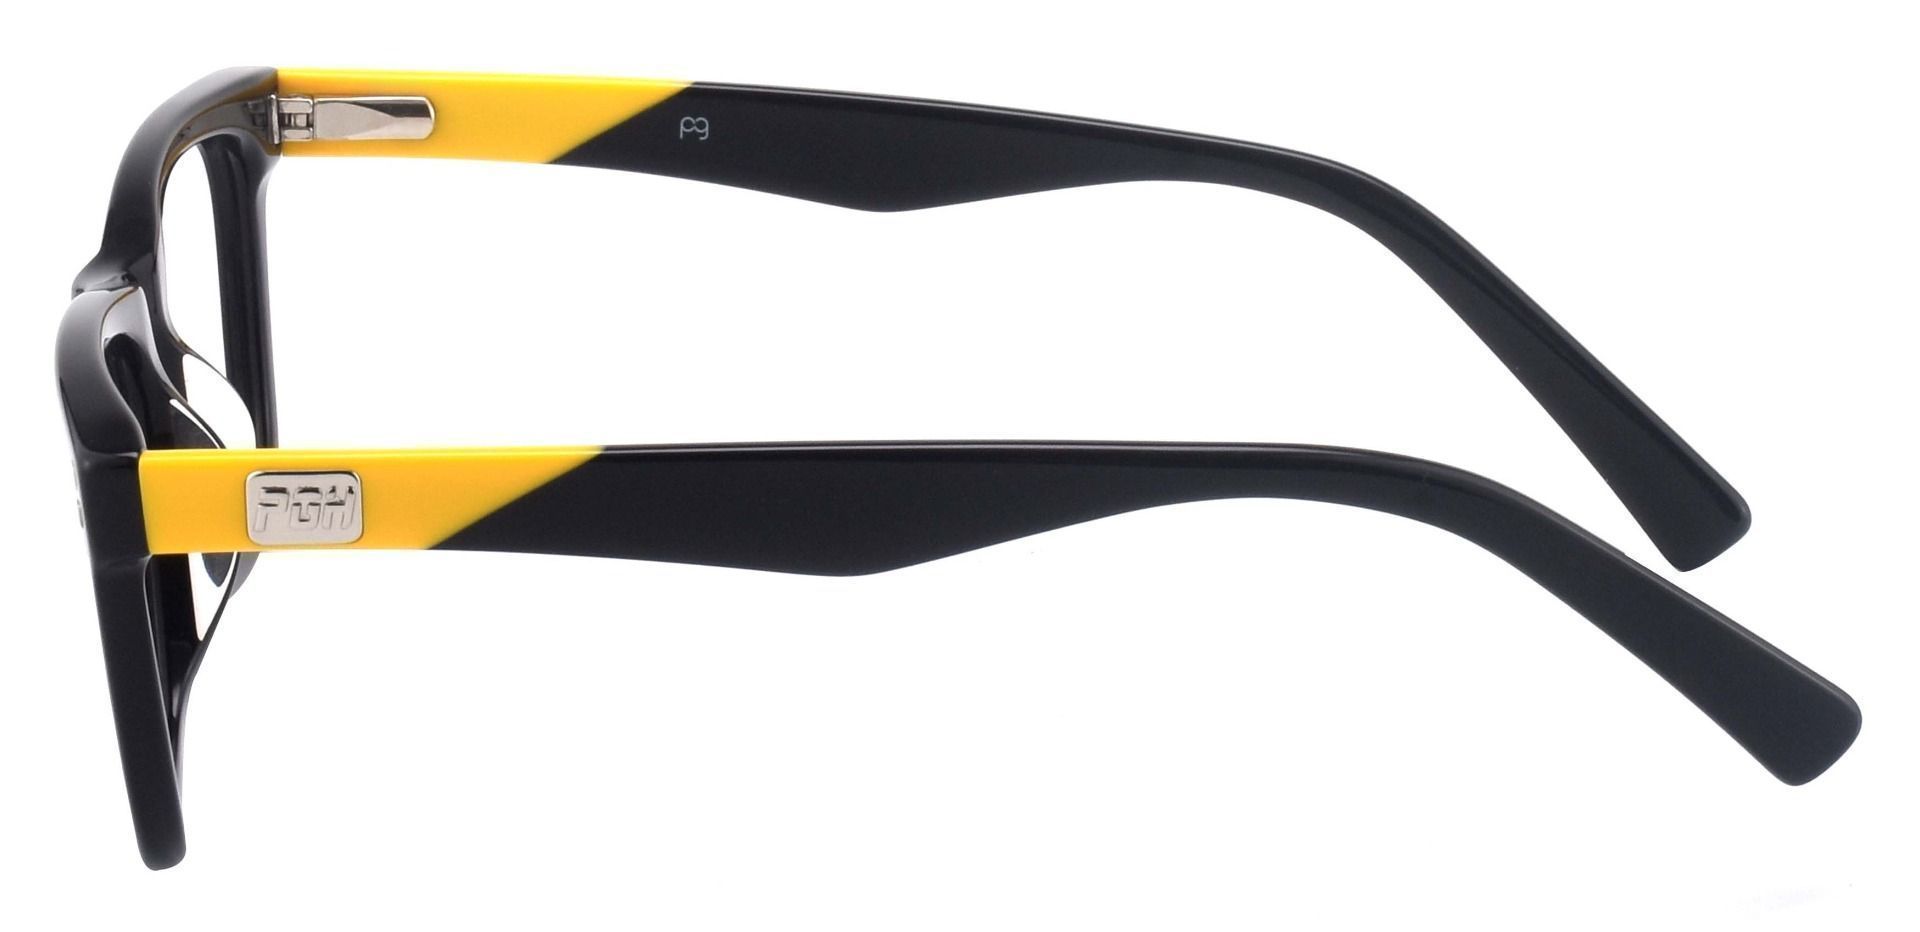 Blitz Rectangle Eyeglasses Frame - The Frame Is Black And Yellow